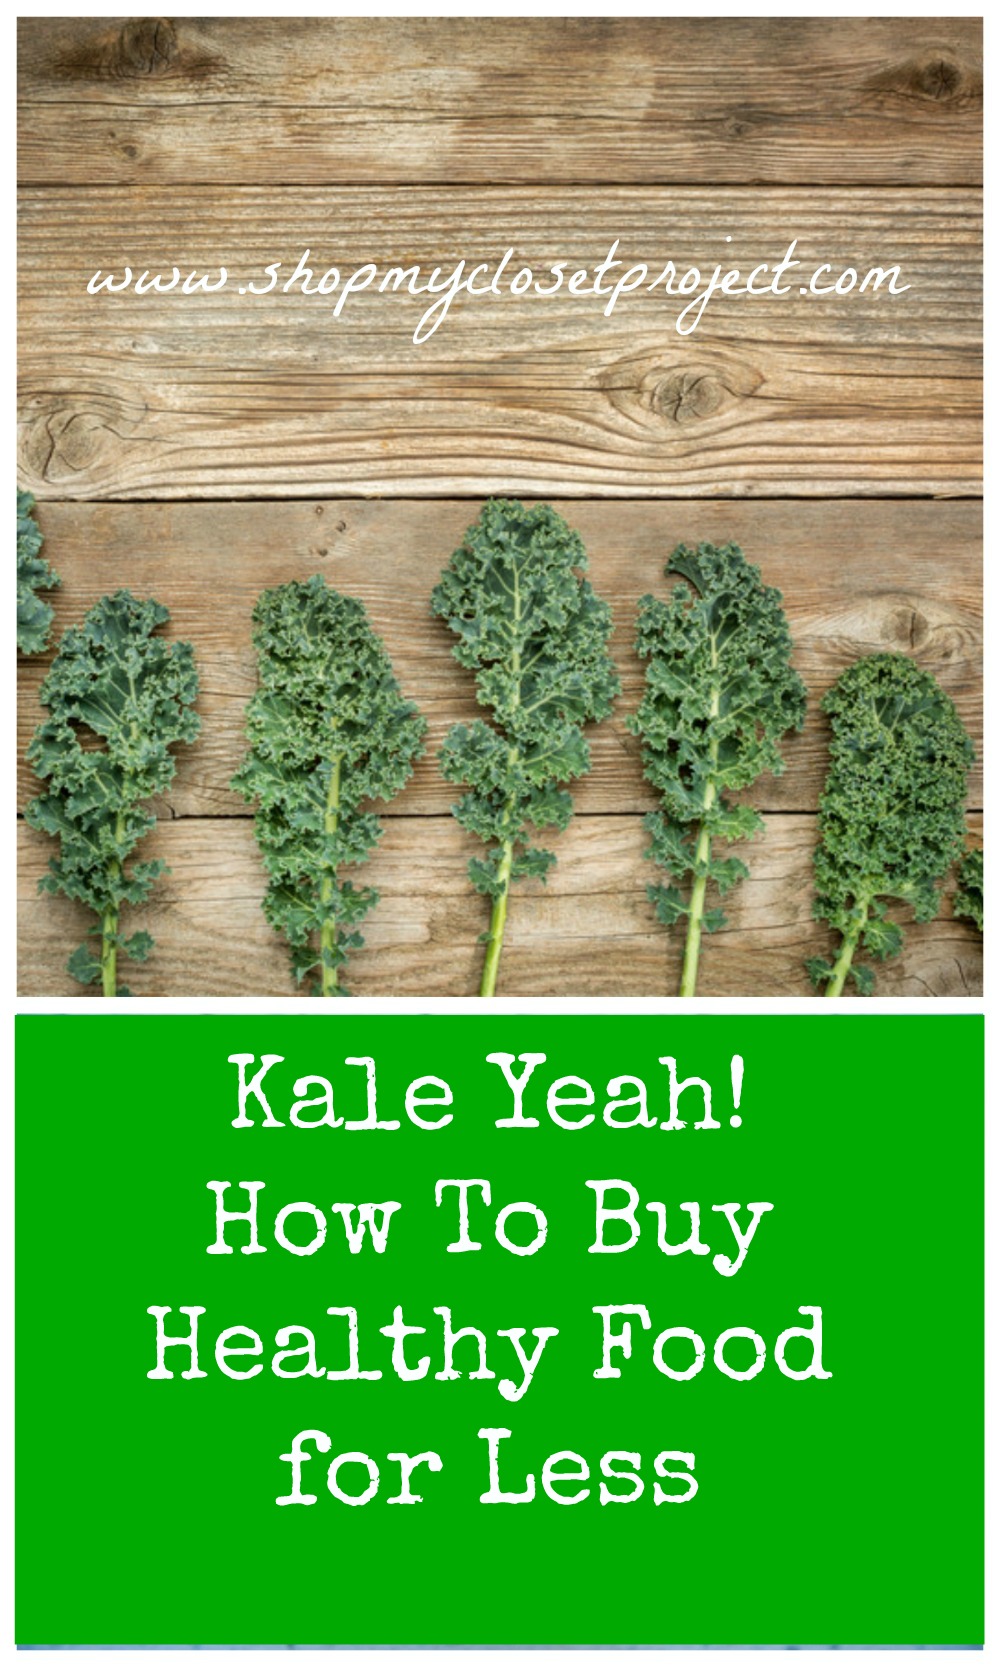 Kale Yeah! How To Buy Healthy Food for Less